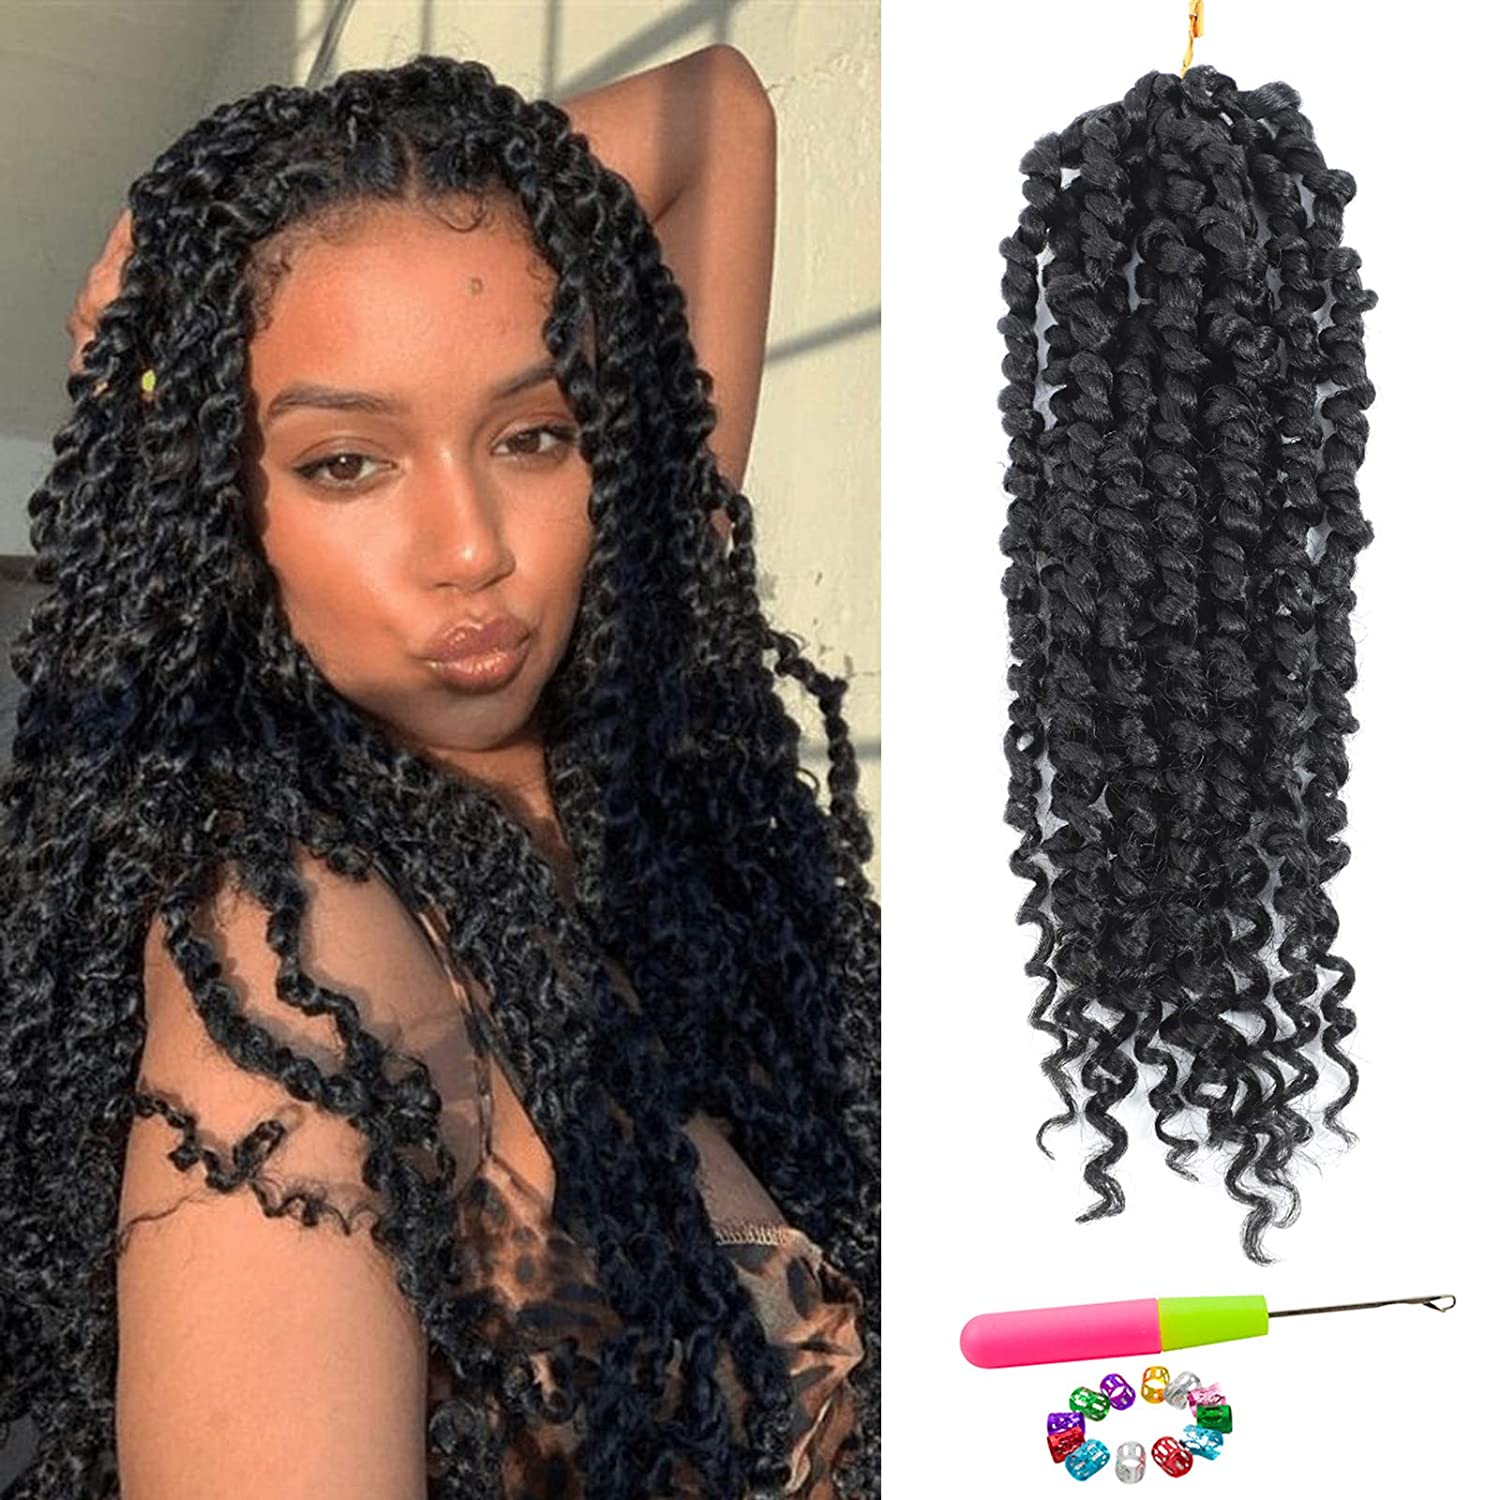 hairstyles for ladies 2022 nigeria latest hairstyle for ladies in nigeria 2022 latest kinky hairstyles in nigeria 2022 latest hair style for ladies in nigeria 2022 new hair style for ladies 2022 nigeria nigeria hair style 2022 latest nigeria hairstyles 2022 trending hairstyles in nigeria 2022 fixing hair style for ladies 2022 hairstyles for ladies 2022 nigeria news female hair cut styles in nigeria 2022 hairstyles for ladies in nigeria 2022 hairstyles for nigerian ladies 2022